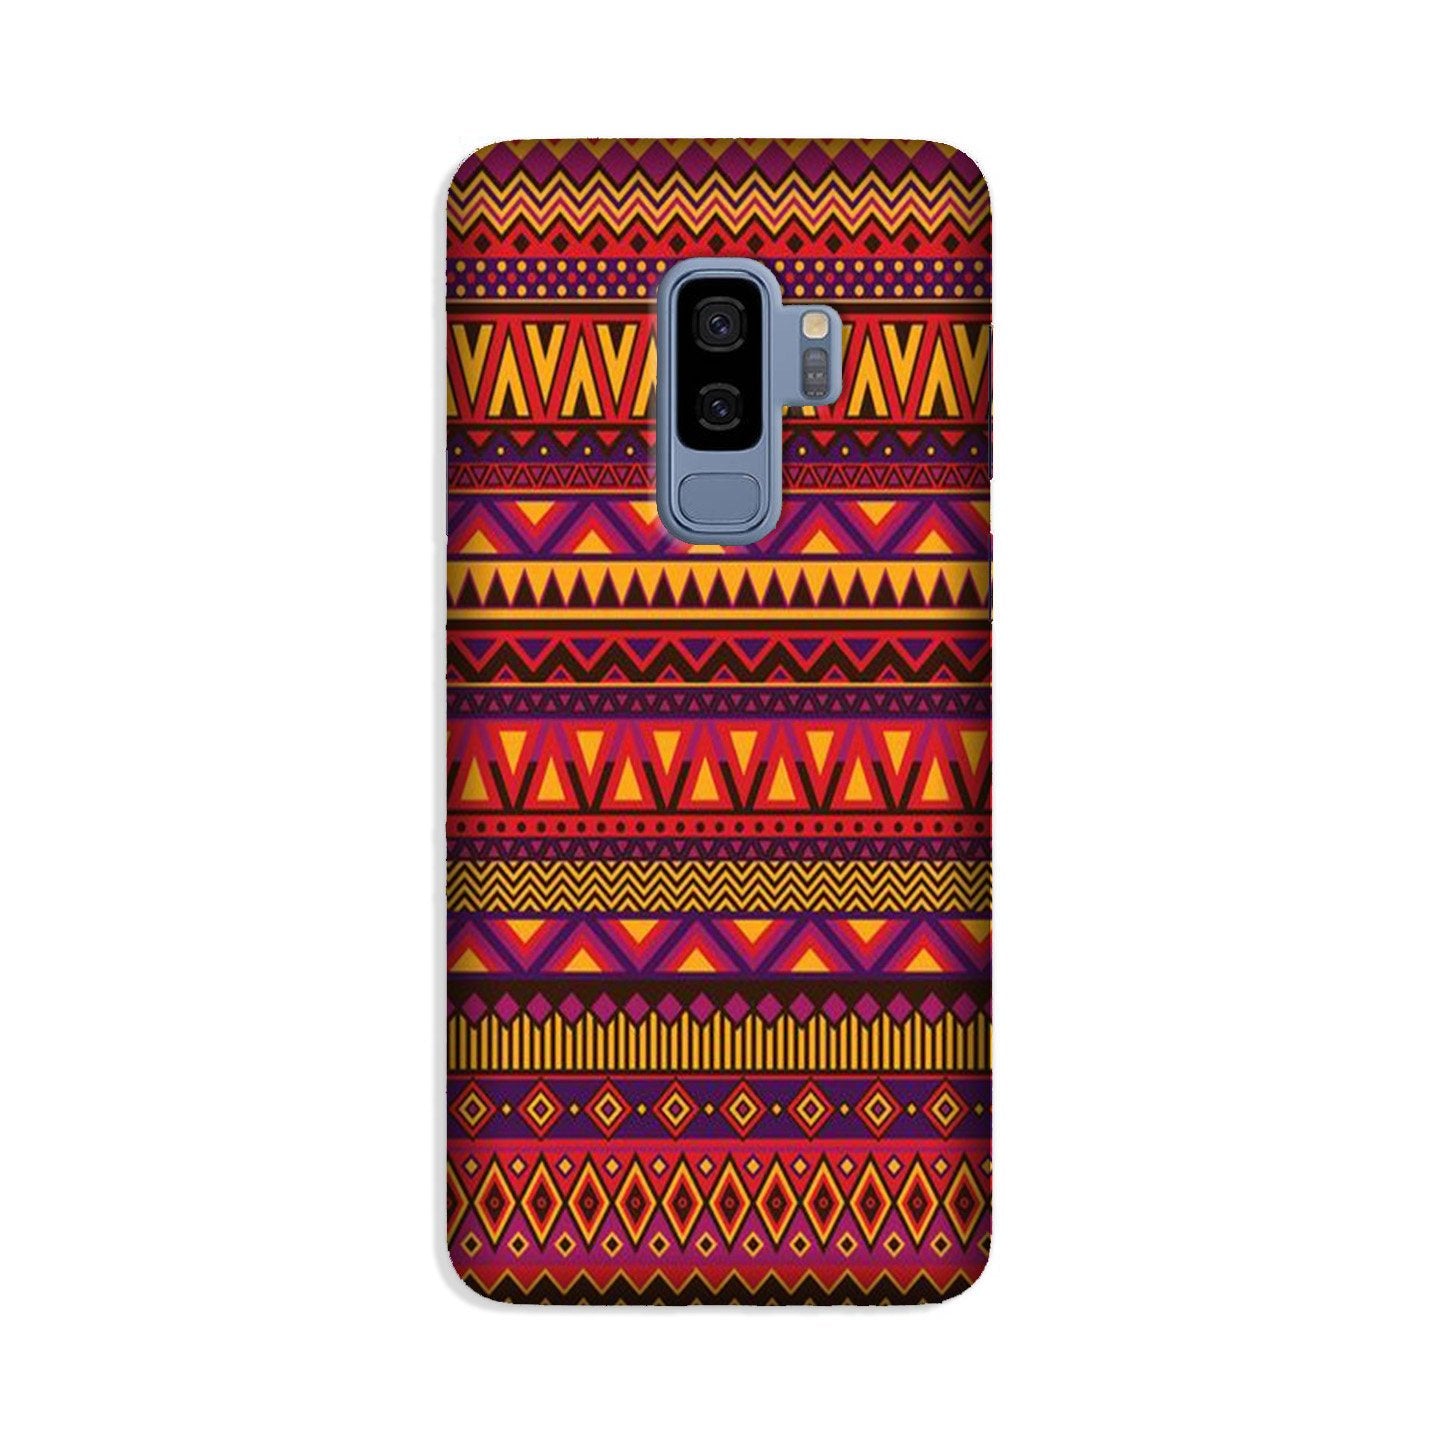 Zigzag line pattern2 Case for Galaxy S9 Plus